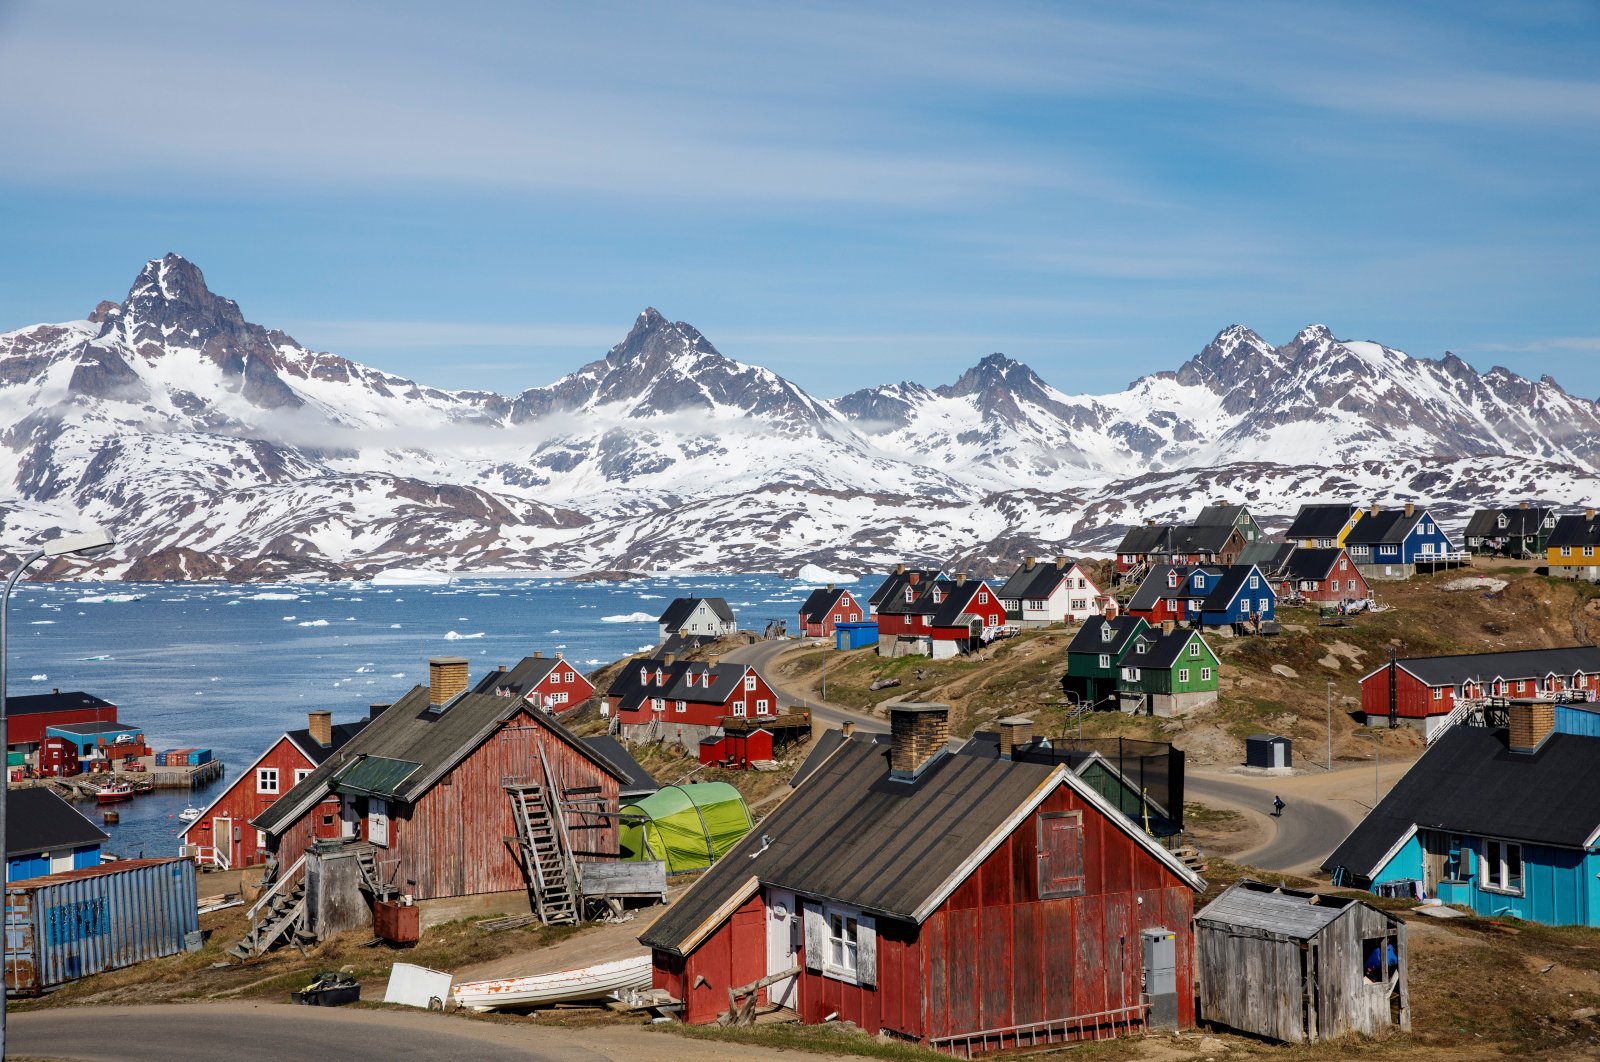 Snow covered mountains rise above the harbor and town of Tasiilaq, Greenland, June 15, 2018. (Reuters Photo)